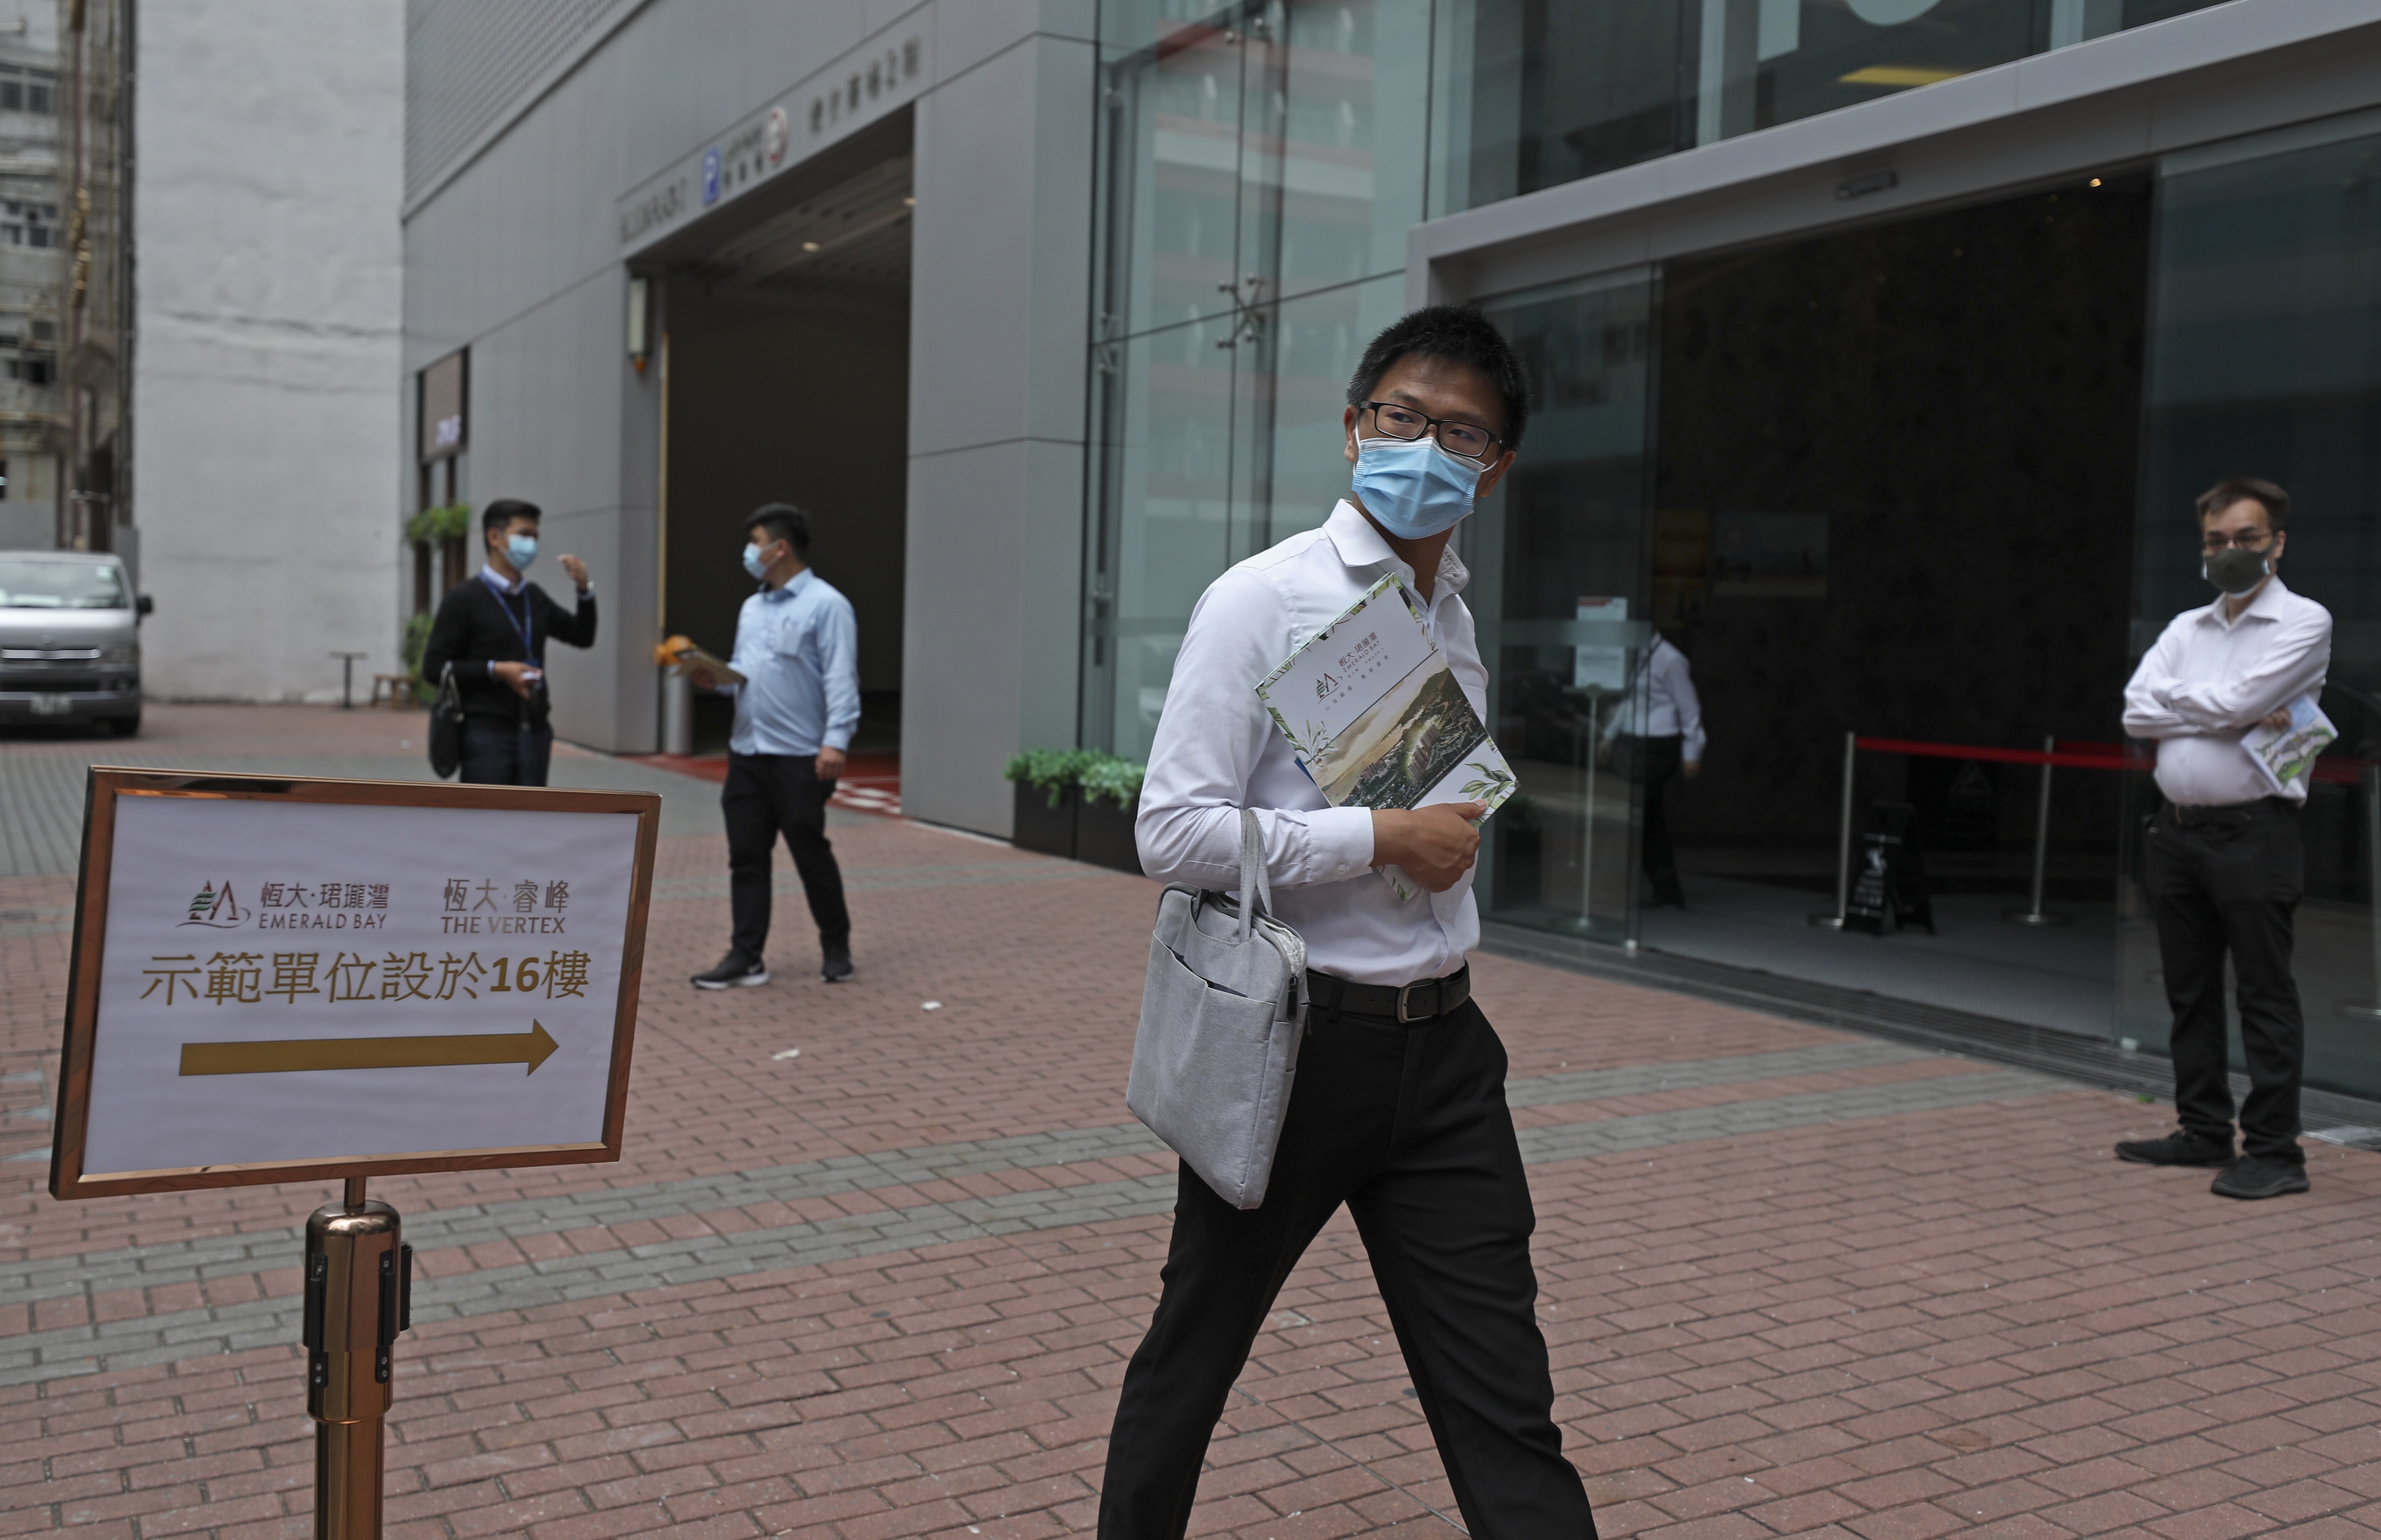 A real property agent approaches pedestrians near Billion Plaza, hoping to sell Emerald Bay flat units in Tuen Mun, Hong Kong on May 9. Photo: Xiaomei Chen